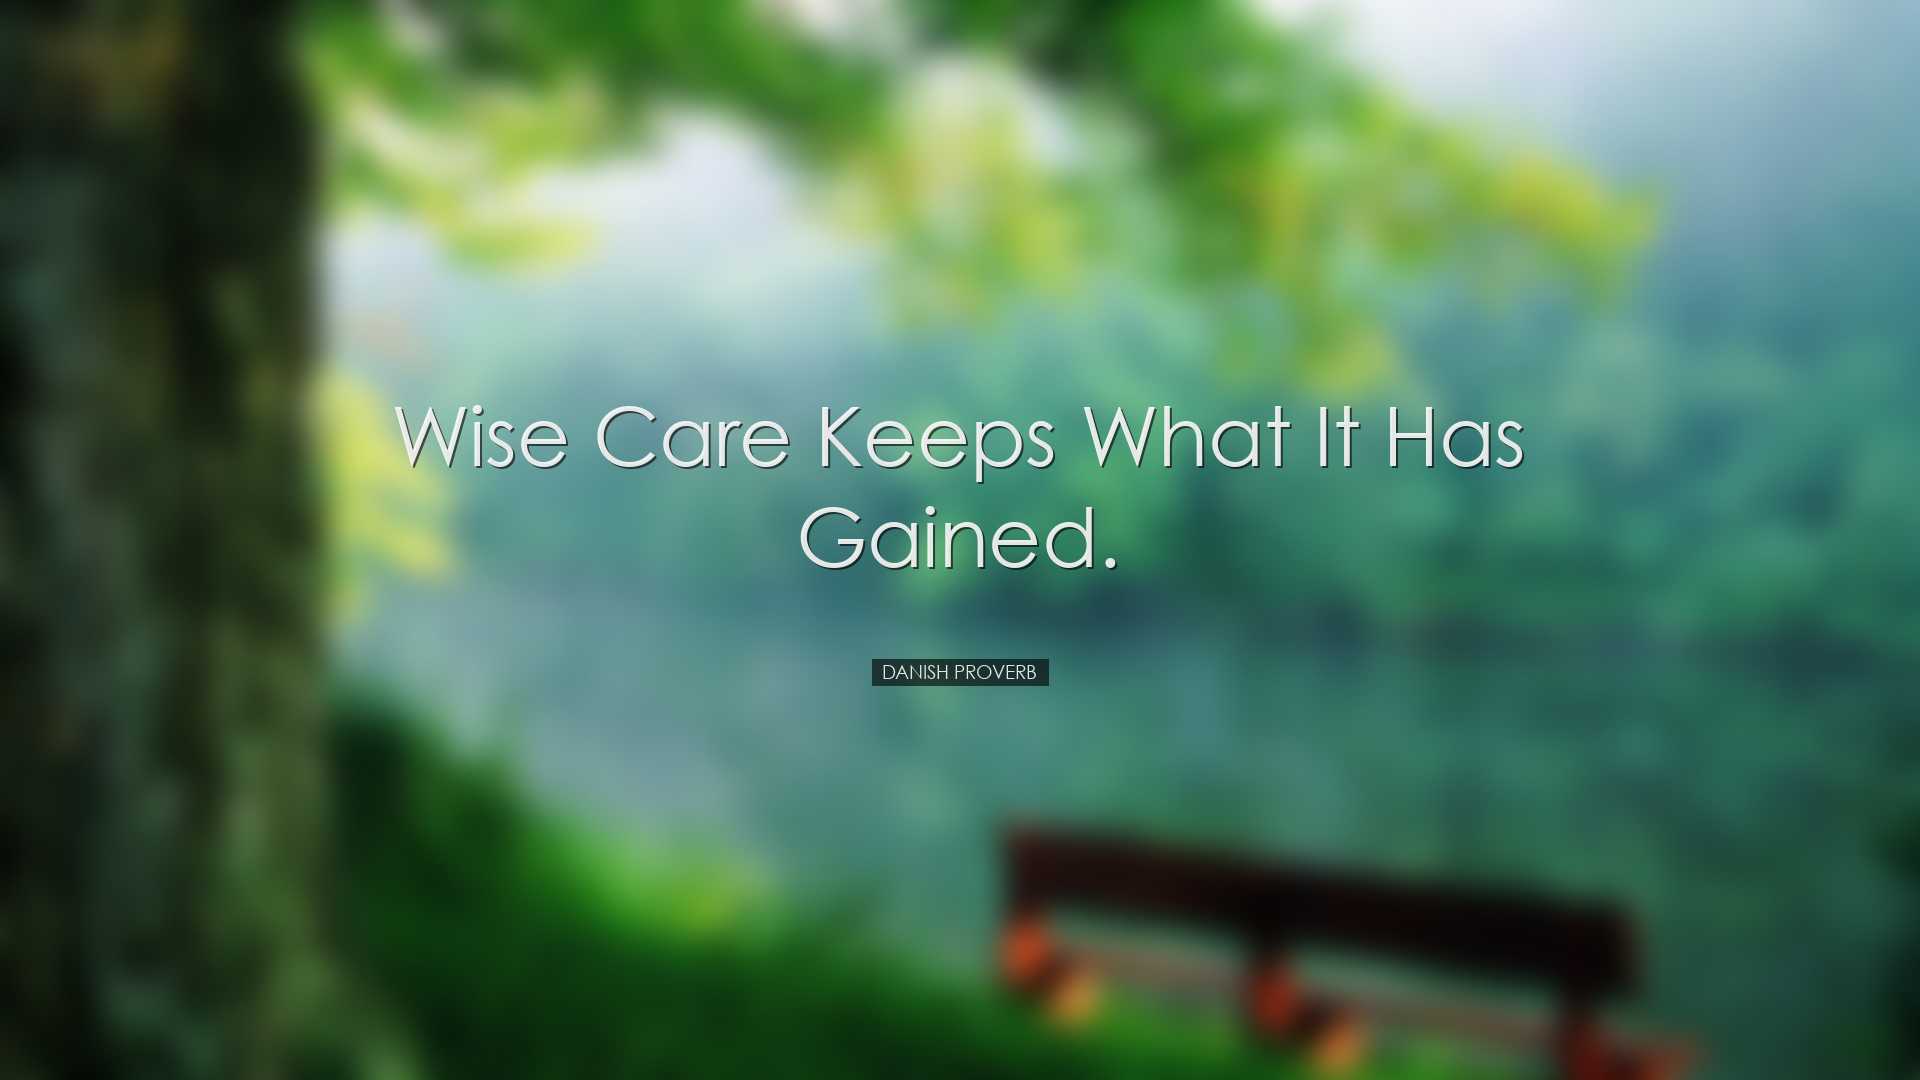 Wise care keeps what it has gained. - Danish proverb